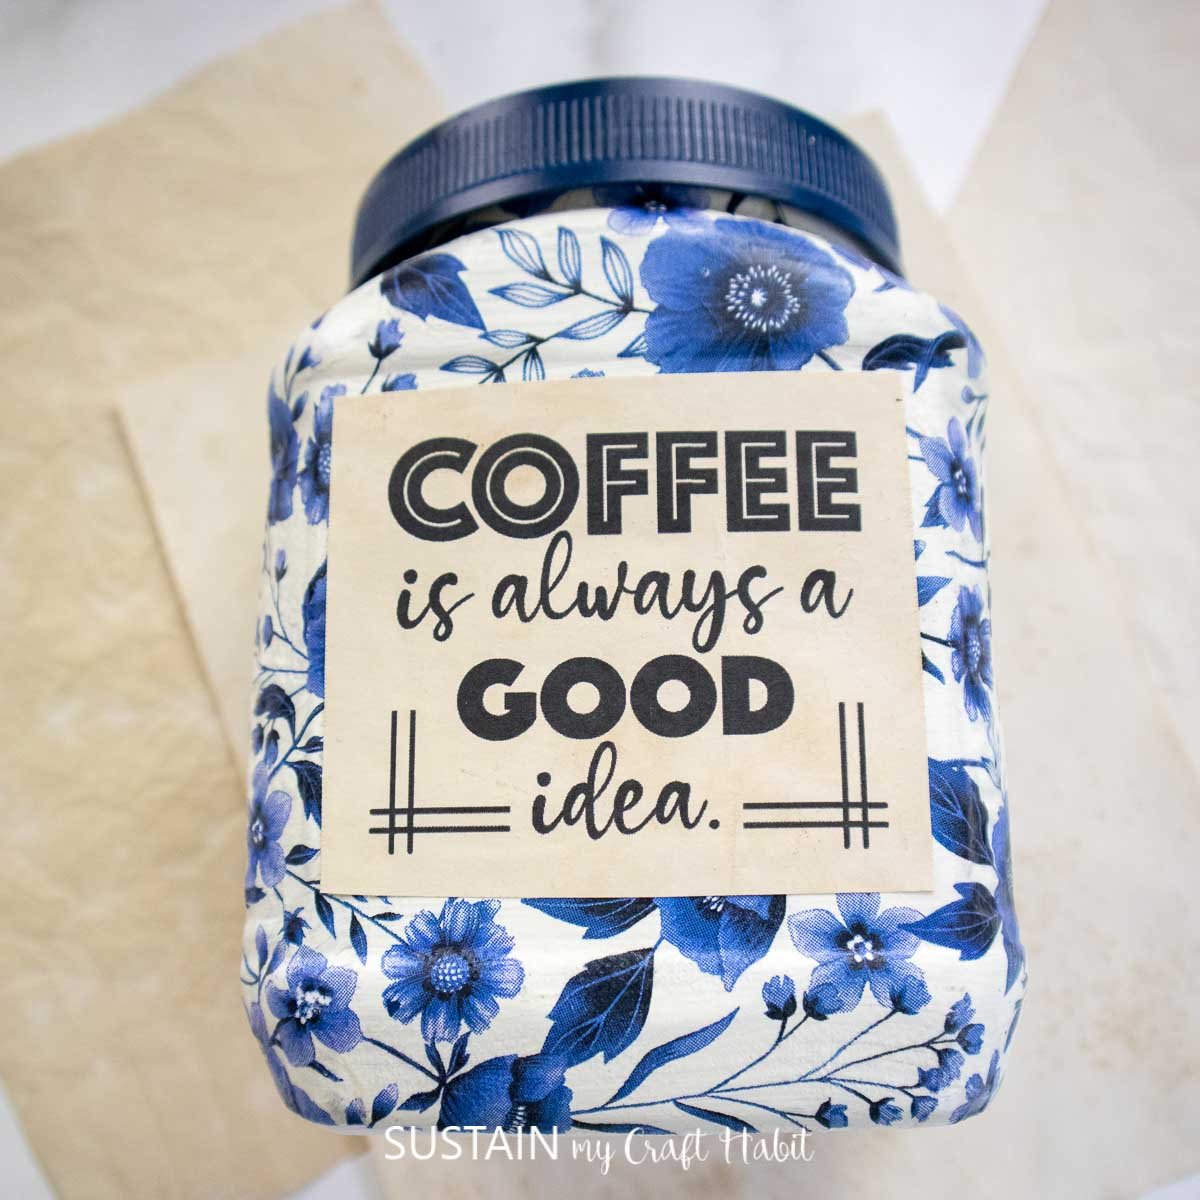 Upcycled coffee canister decorated with a printable saying.